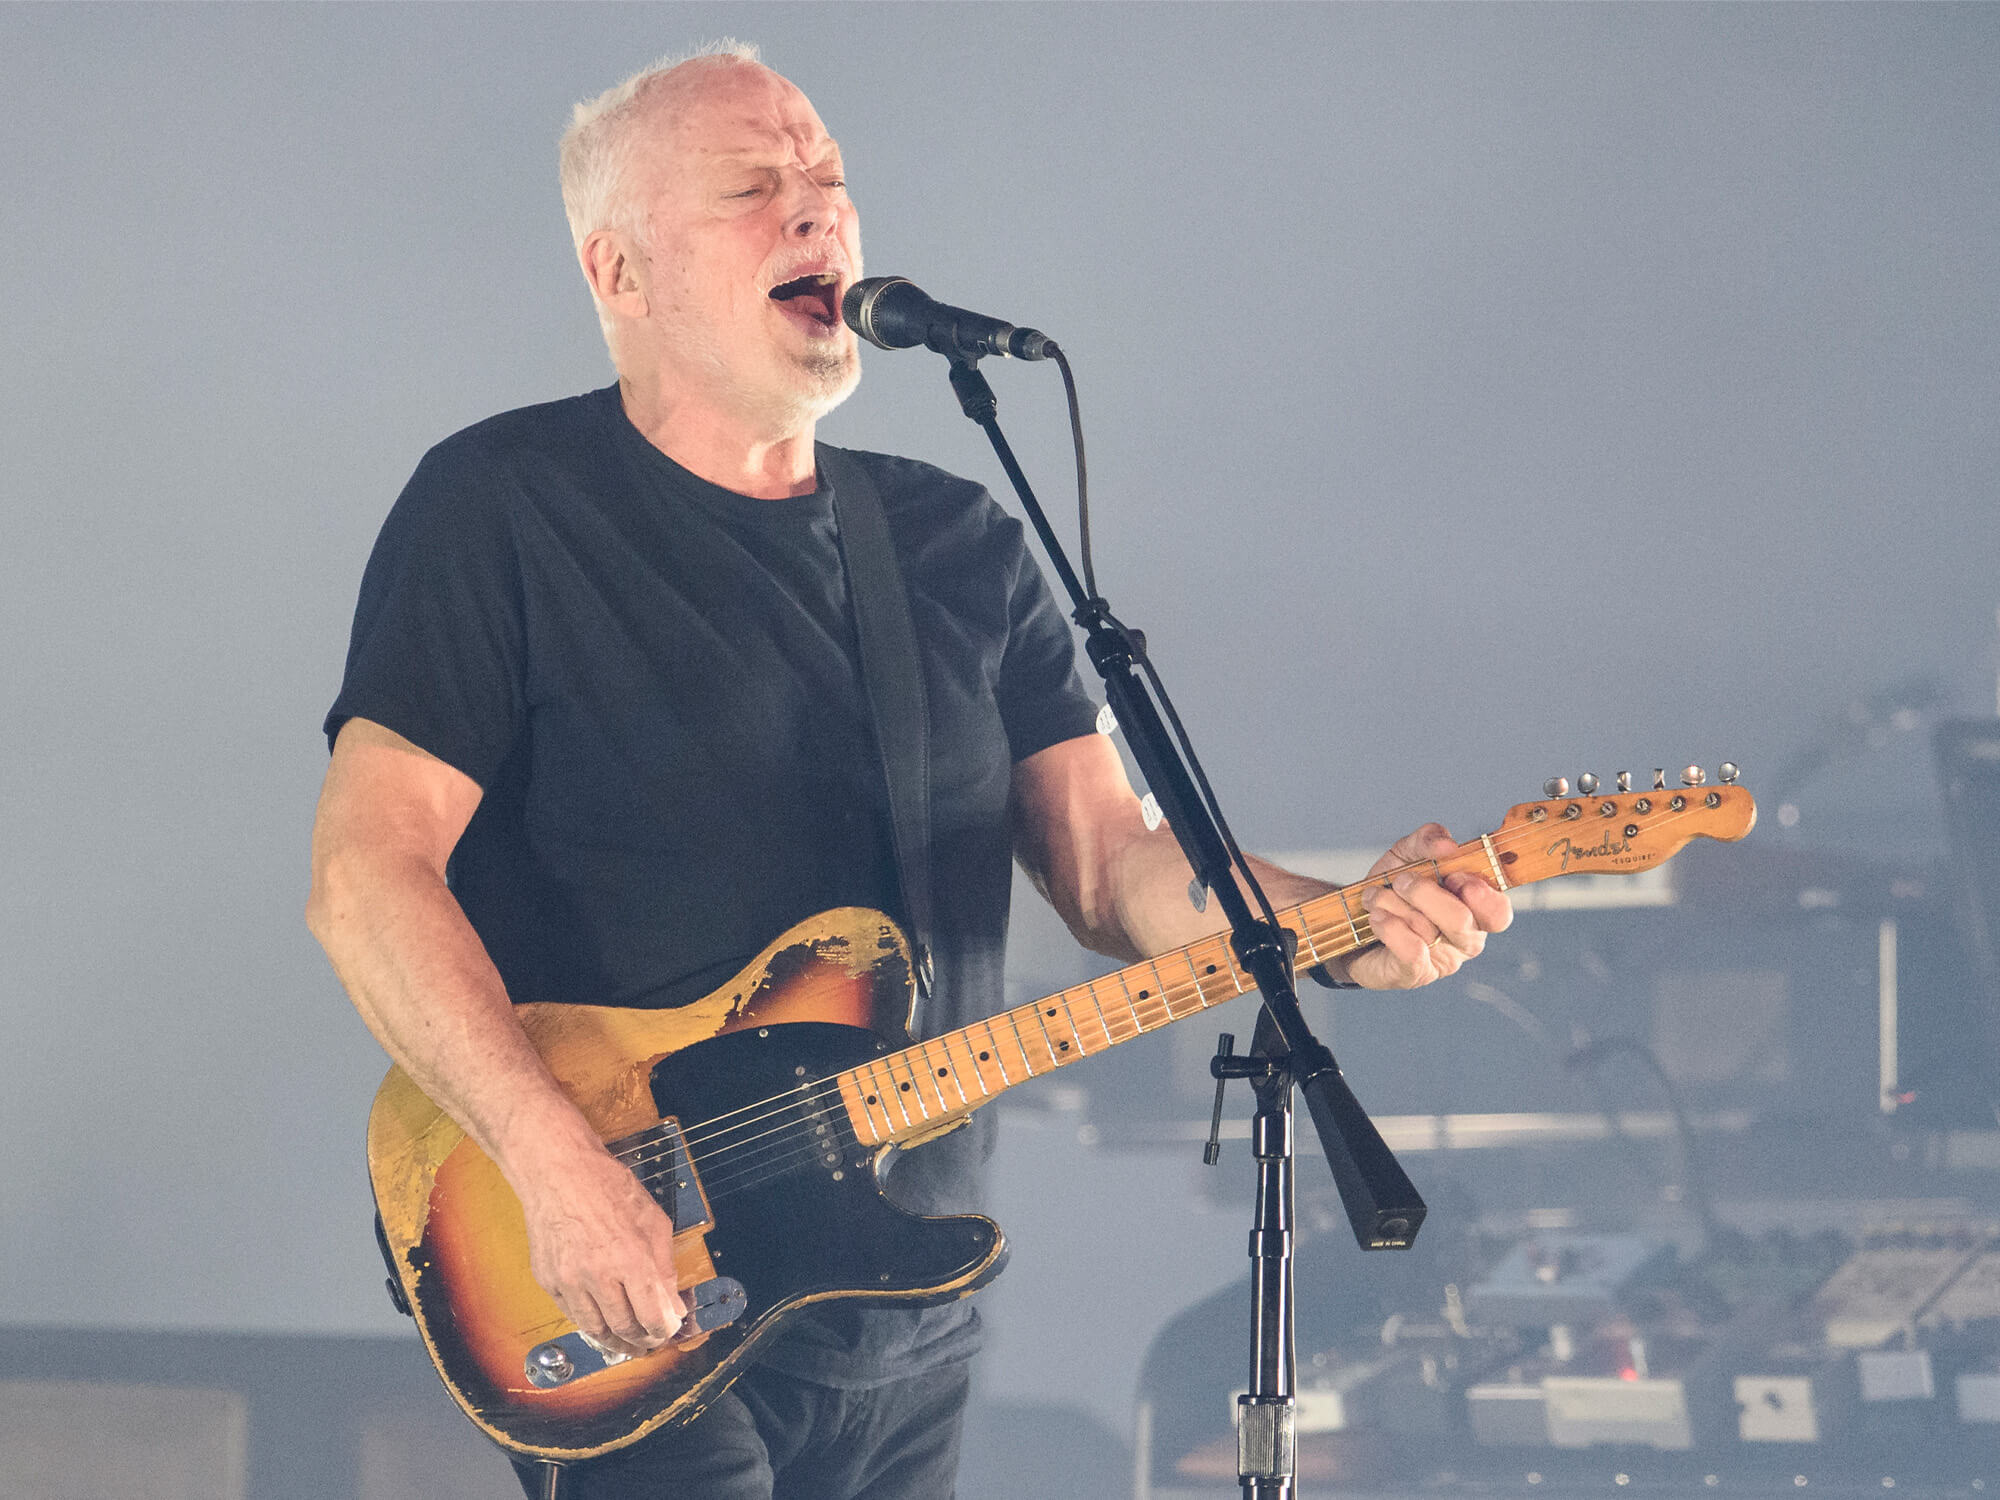 David Gilmour playing a Telecaster on stage and singing